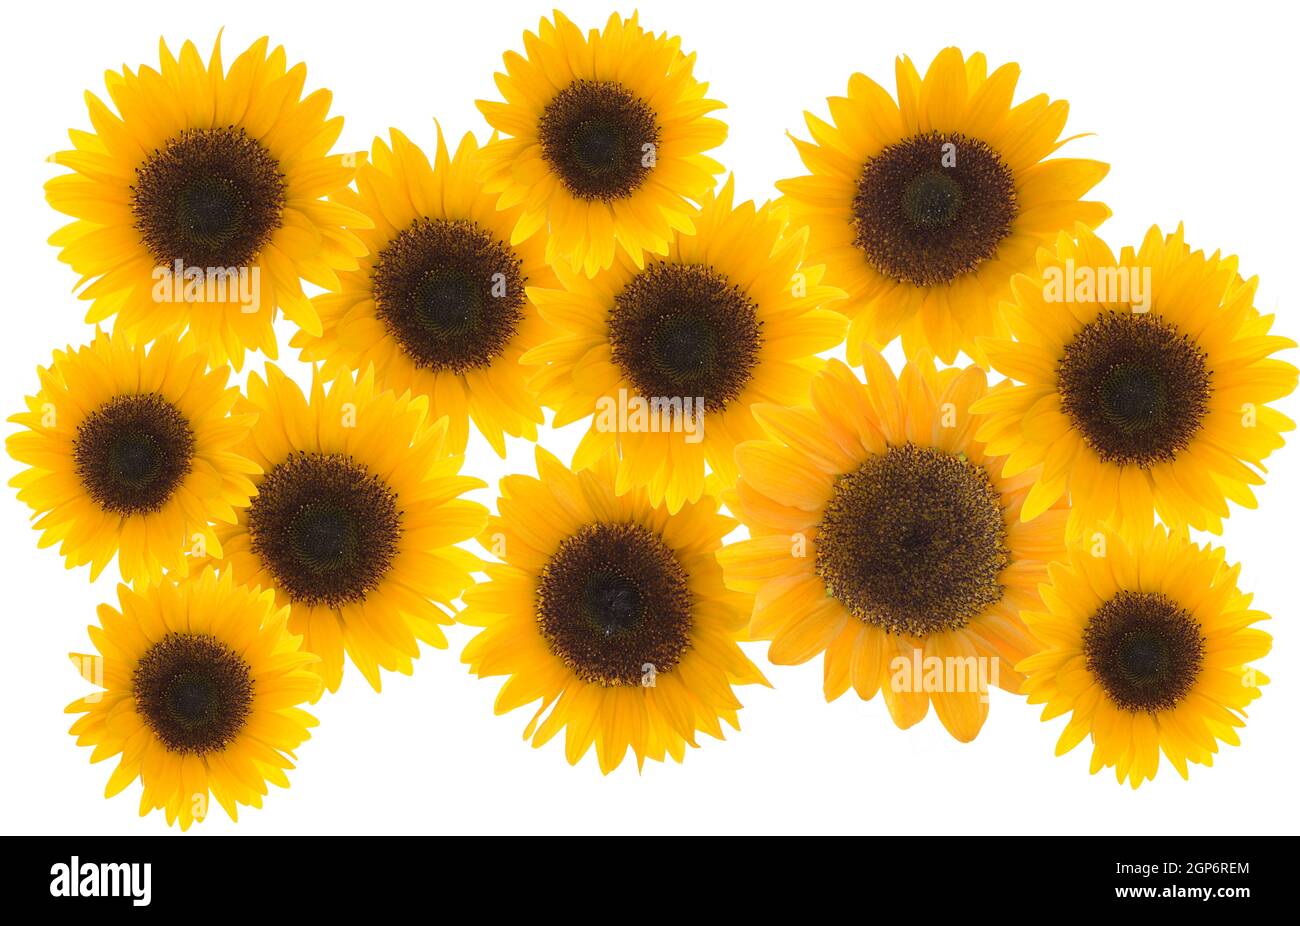 Sunflower (Helianthus annuus) blossoms on a white background, studio shot, Germany Stock Photo